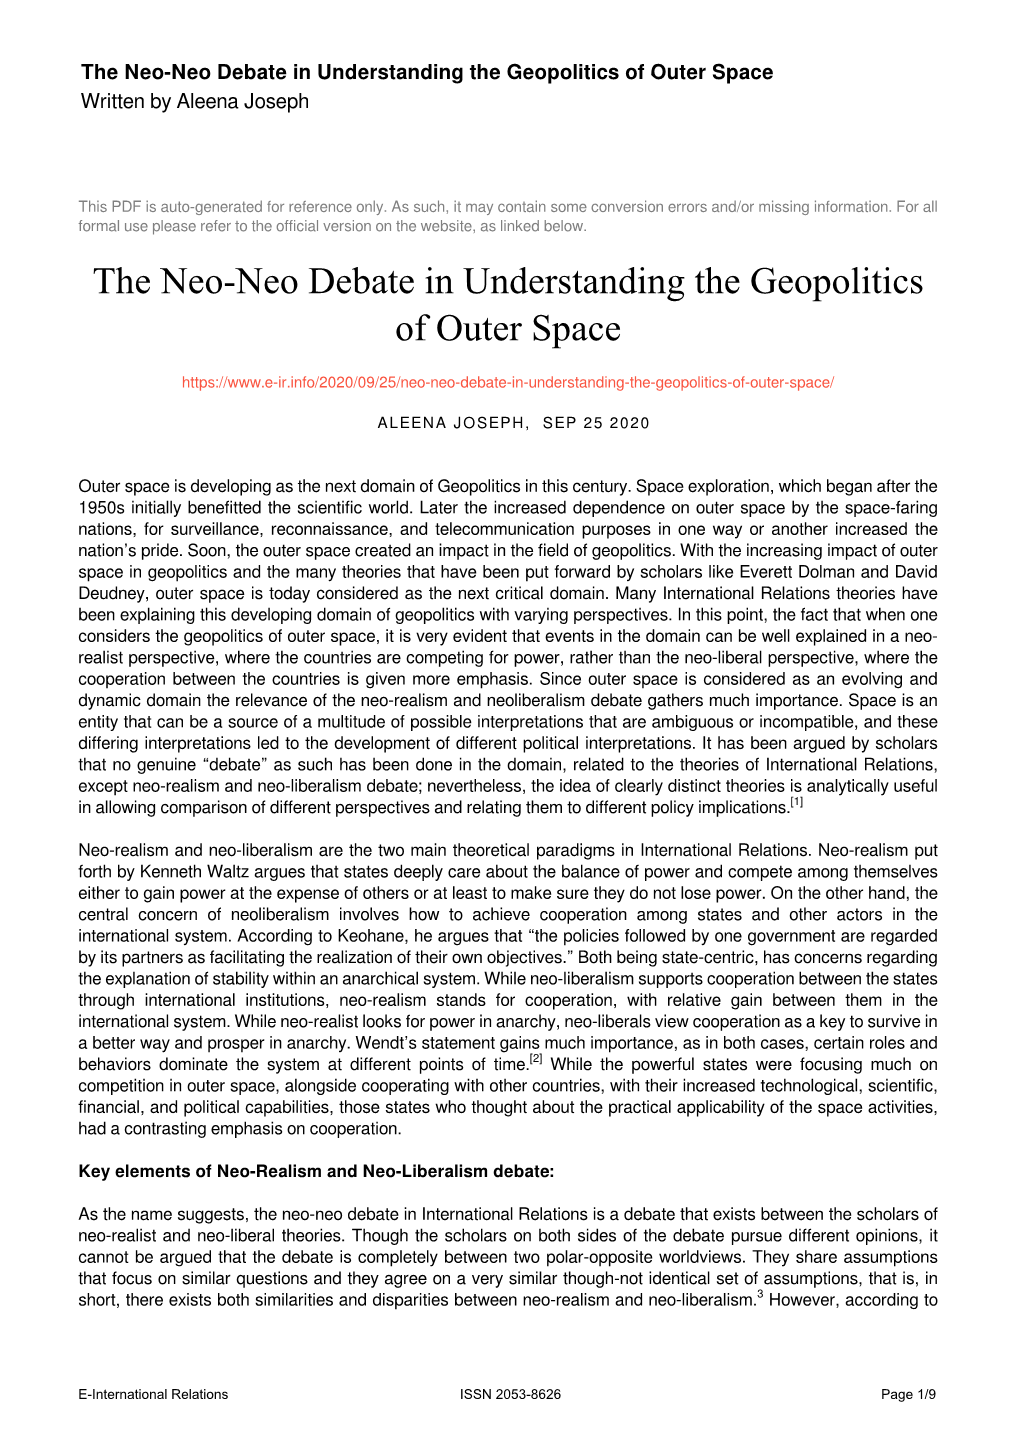 The Neo-Neo Debate in Understanding the Geopolitics of Outer Space Written by Aleena Joseph